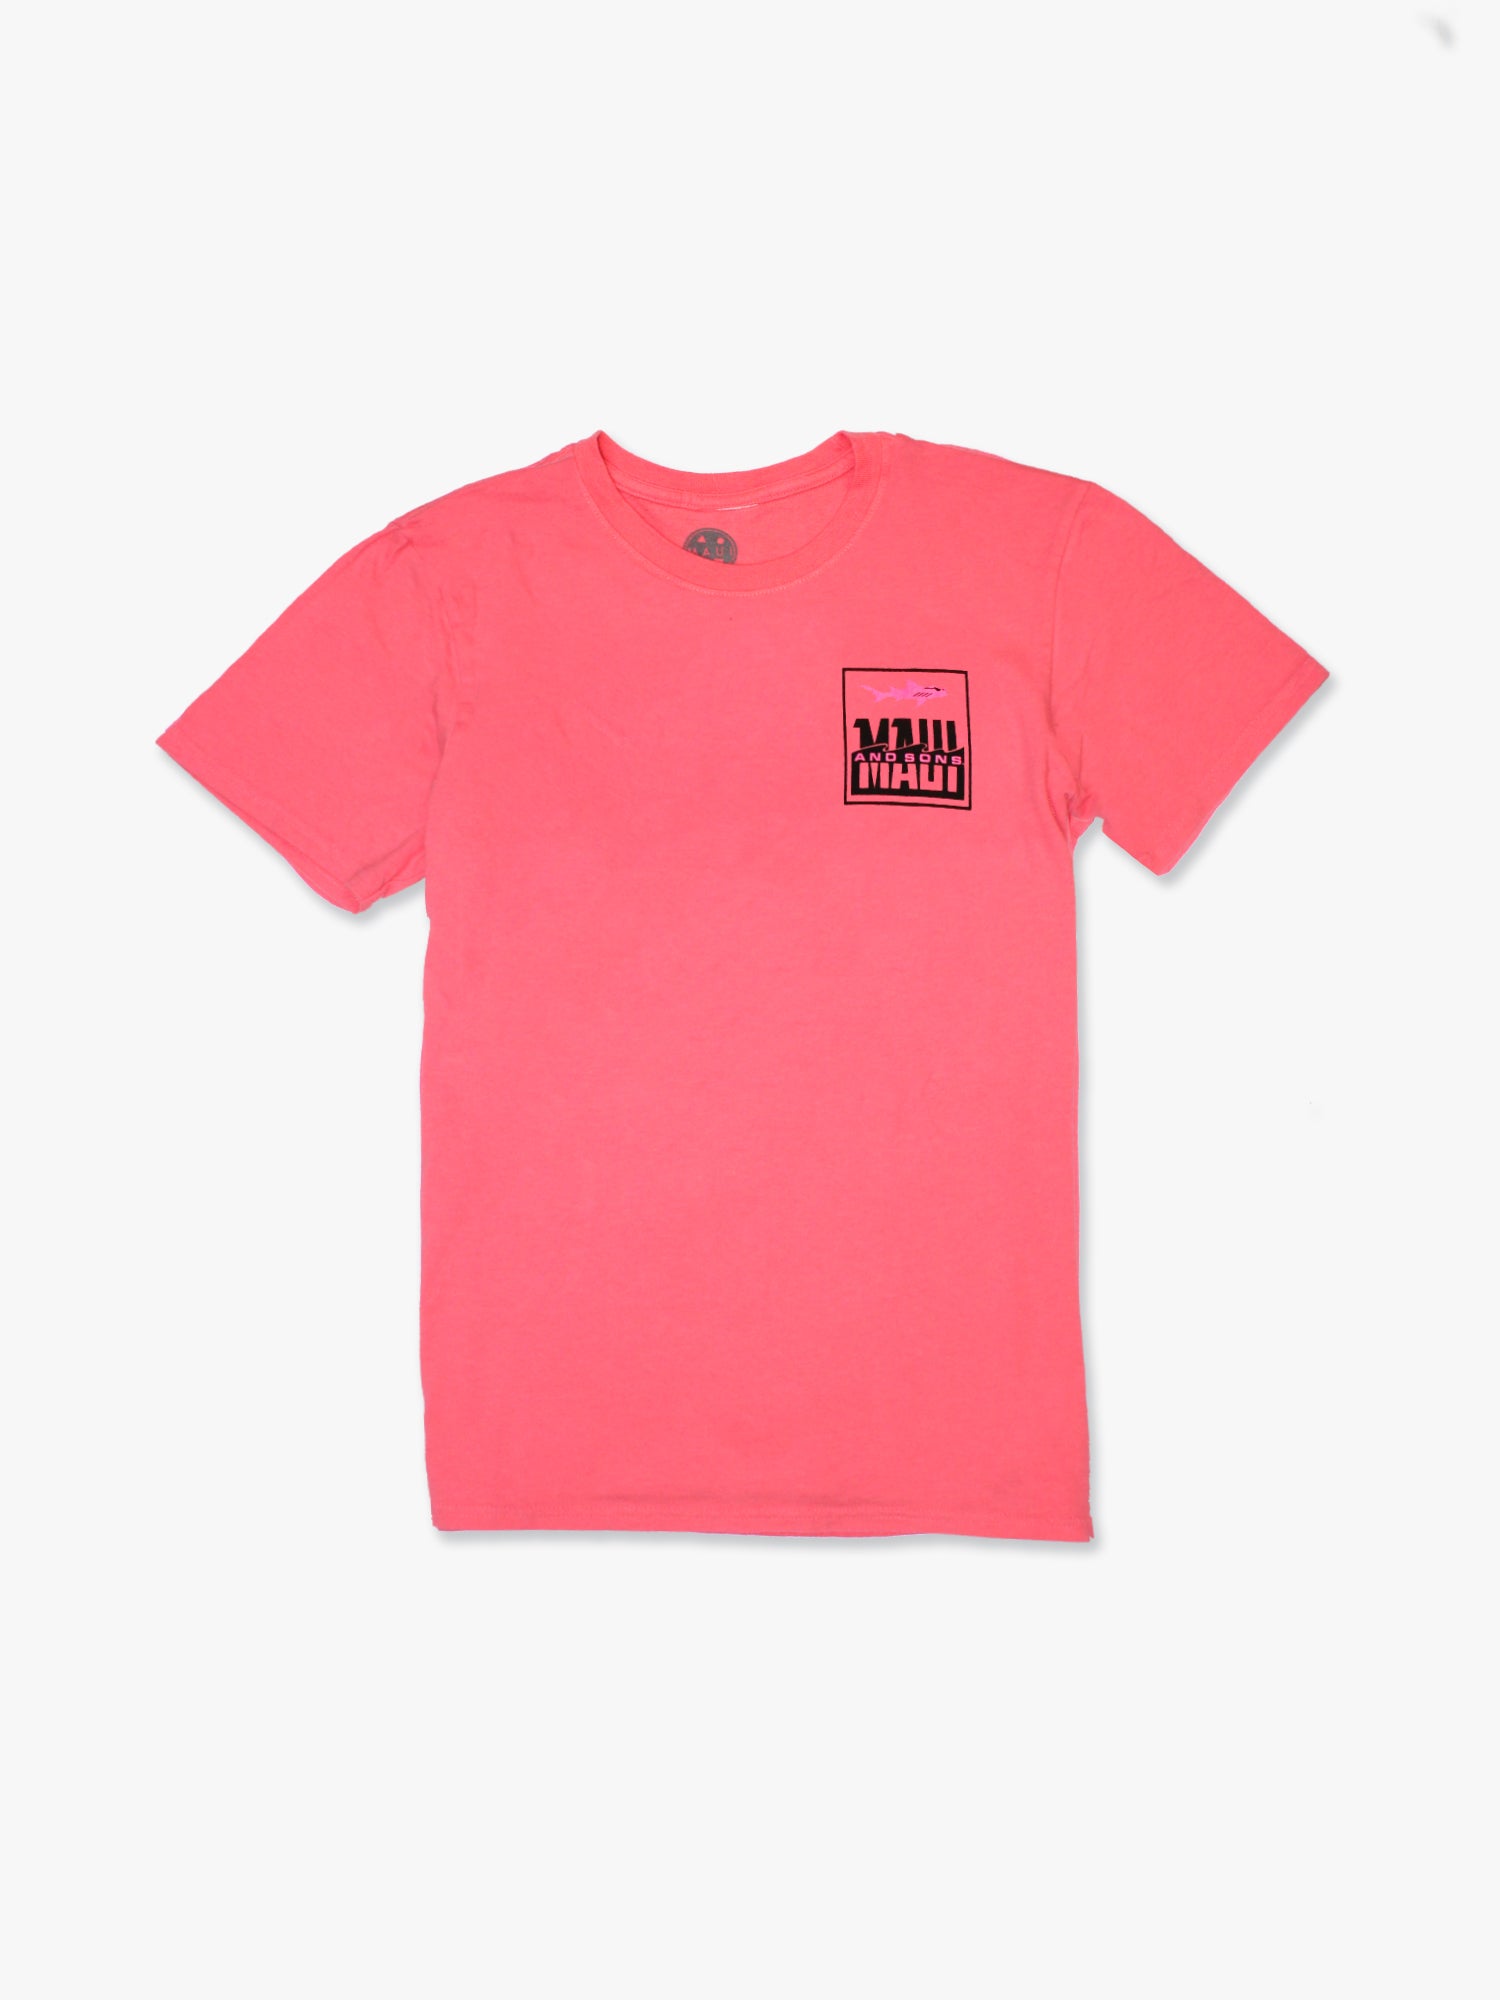 Boys Fish Out Of Water T-Shirt in Coral